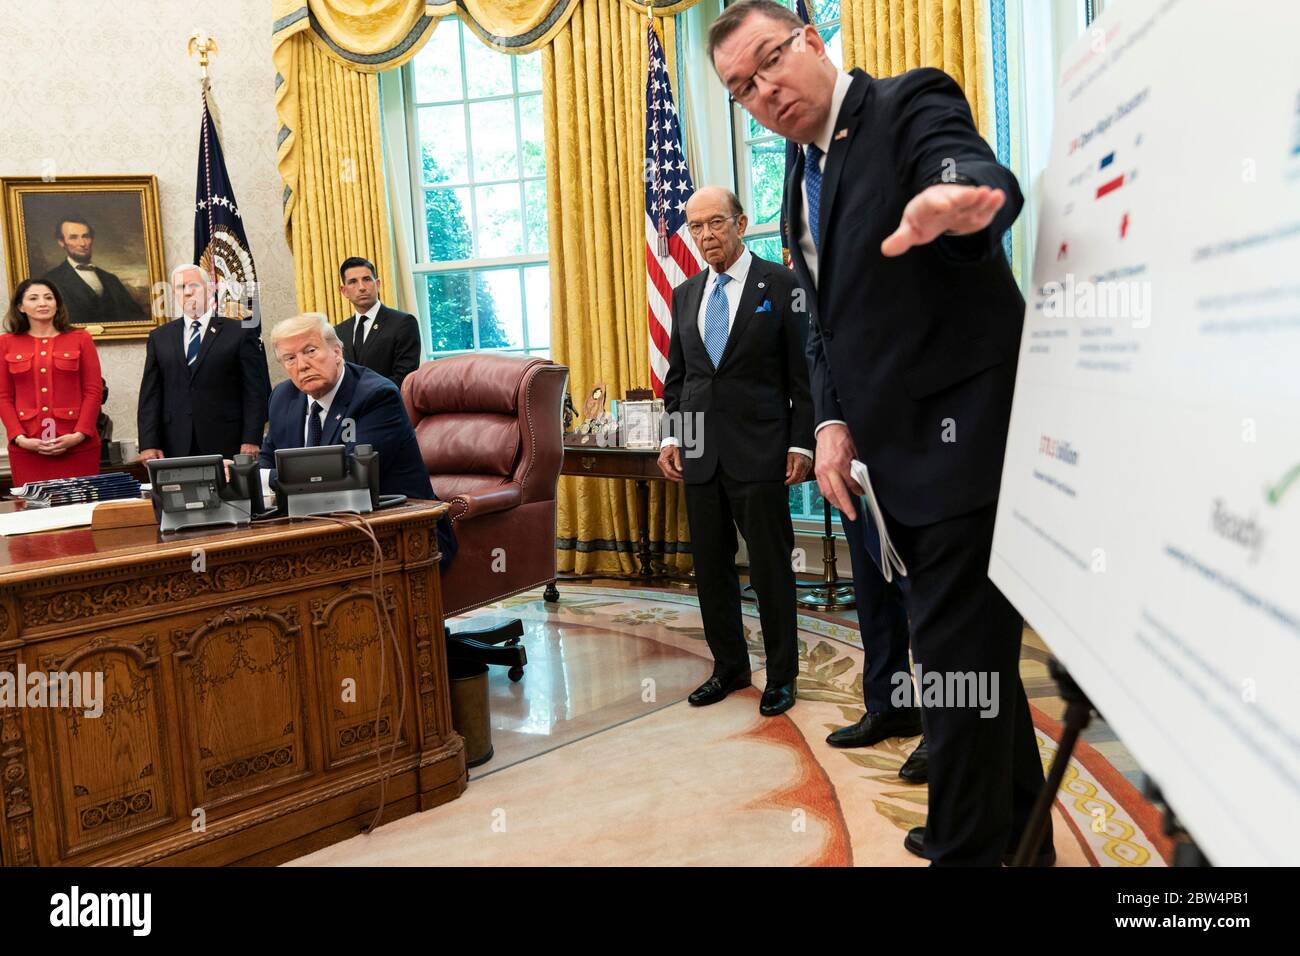 Washington, United States Of America. 28th May, 2020. Washington, United States of America. 28 May, 2020. U.S. President Donald Trump, joined by Vice President Mike Pence and senior staff, receives a briefing on the 2020 Hurricane Season in the Oval Office of the White House May 28, 2020 in Washington, DC Credit: Shealah Craighead/White House Photo/Alamy Live News Stock Photo